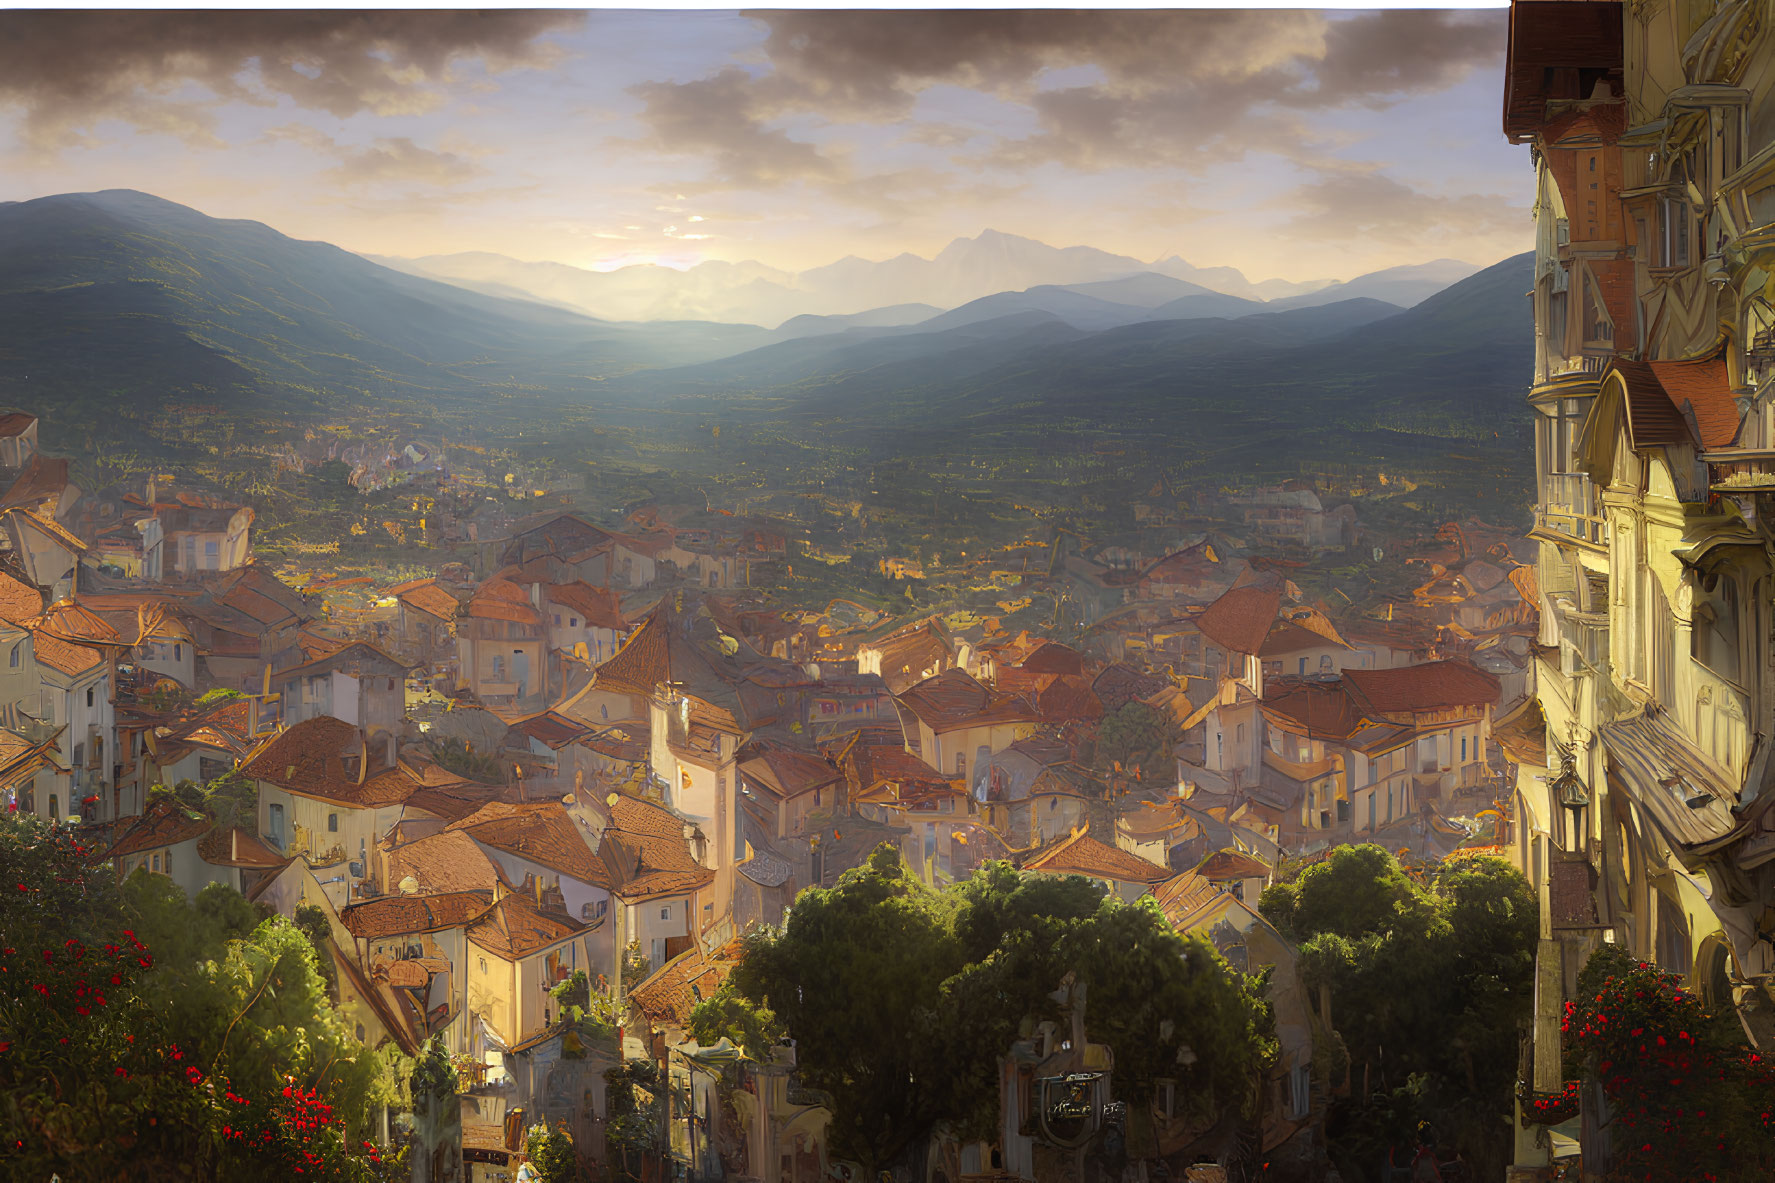 Scenic sunset view of old European town with terracotta rooftops